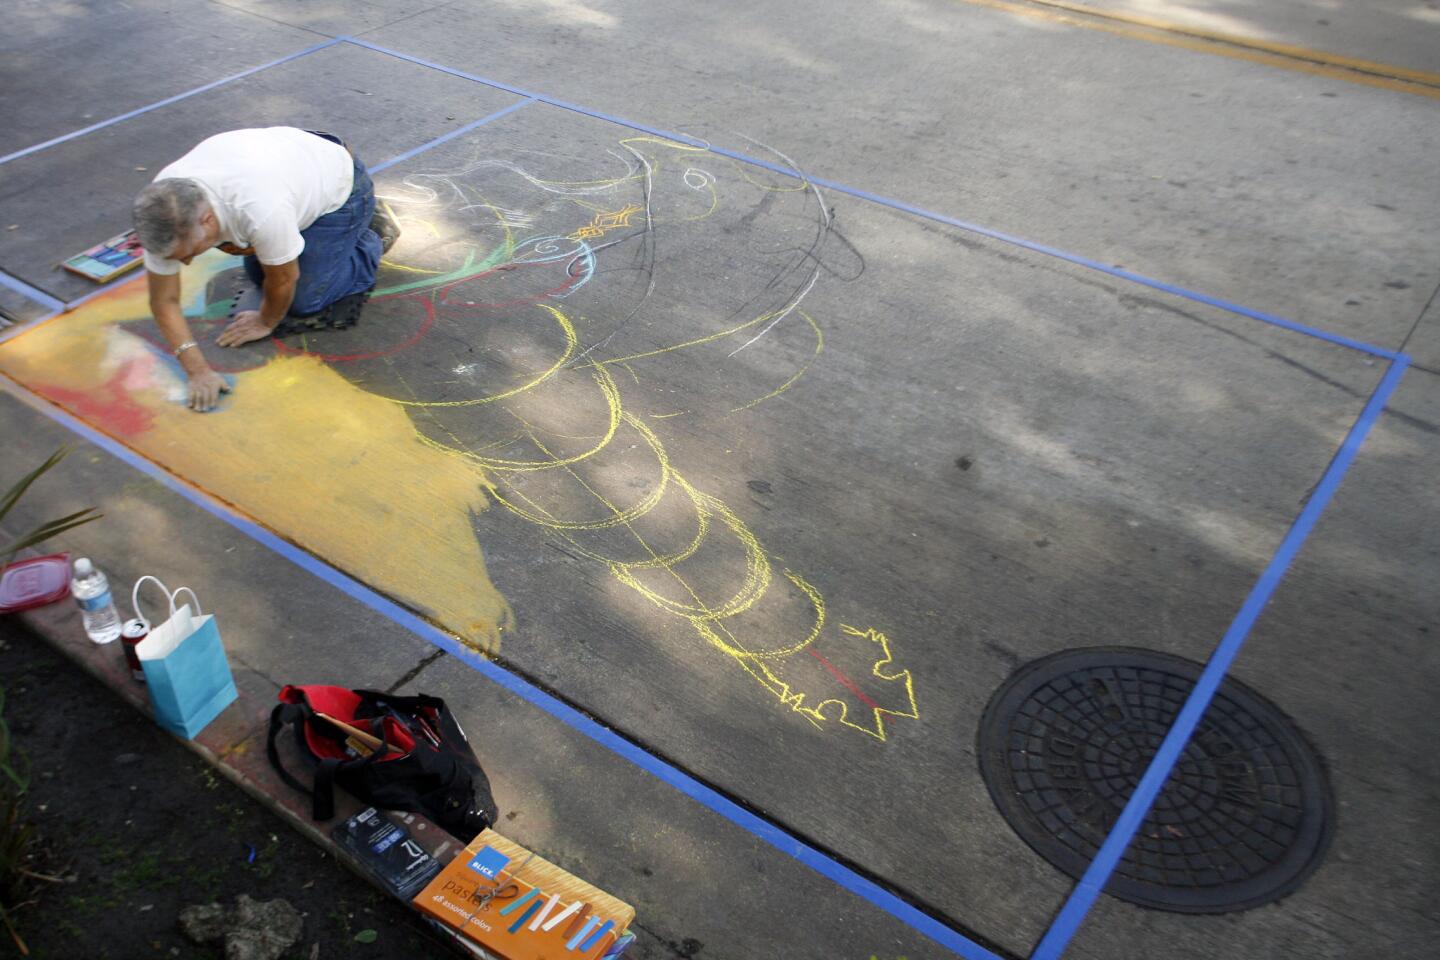 Oscar de Leon uses chalk to draw his 10' x 10' piece during Downtown Burbank ARTS Festival, which took place on San Fernando Rd. between Magnolia Blvd. and Olive Ave. on Saturday, November 3, 2012.